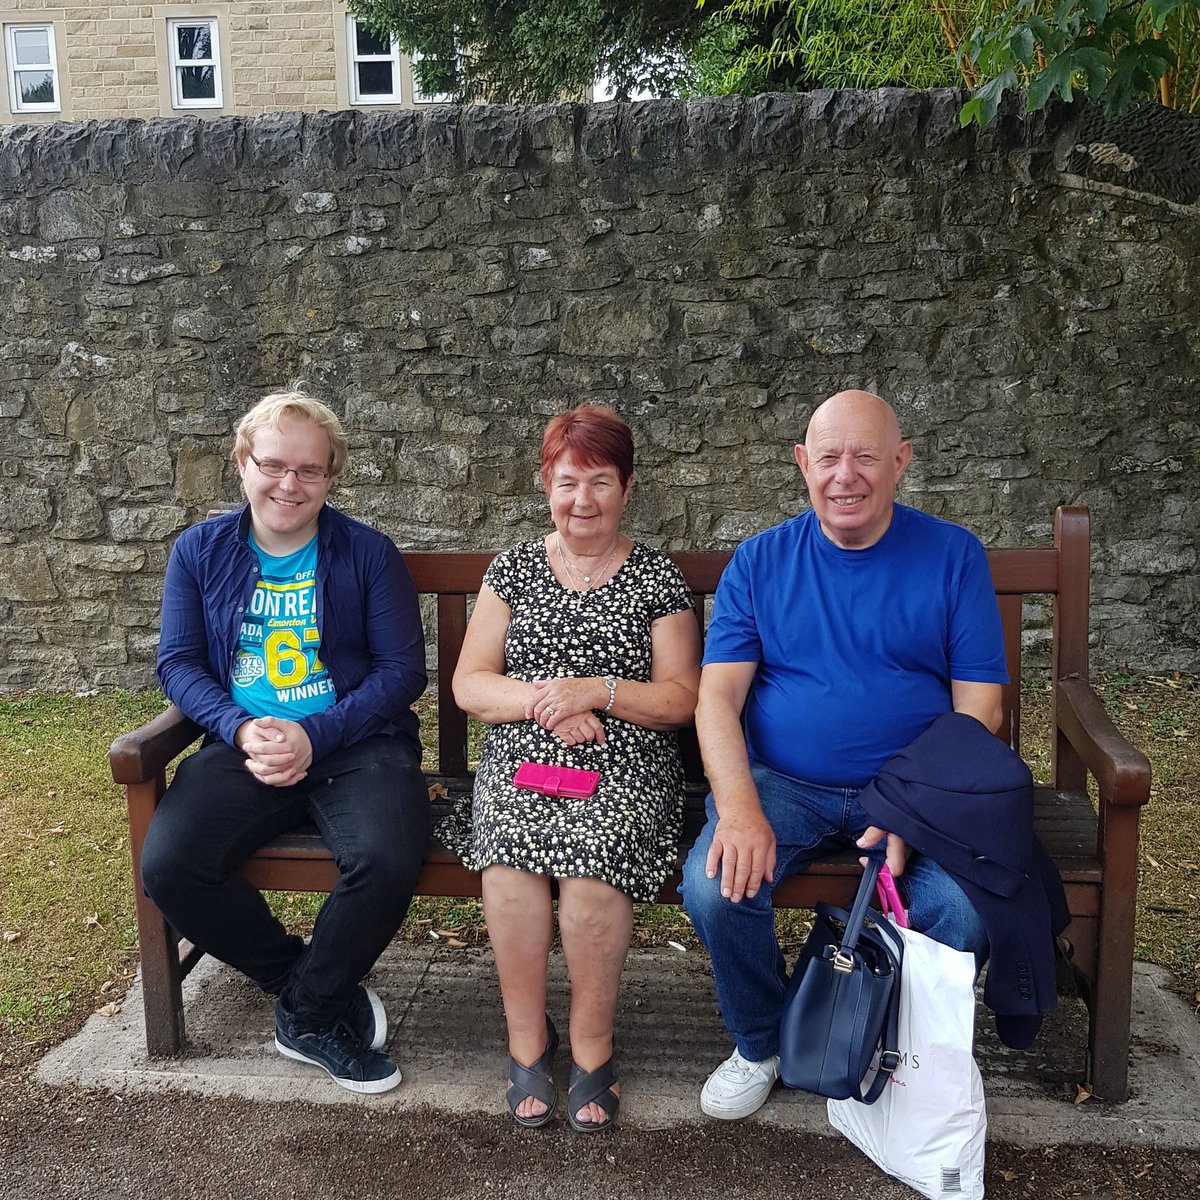 Saturdays spent exploring pretty little Bakewell with my favourite people ❤ My grandparents made the trip all the way up from Essex to Sheffield to visit us! #toughones